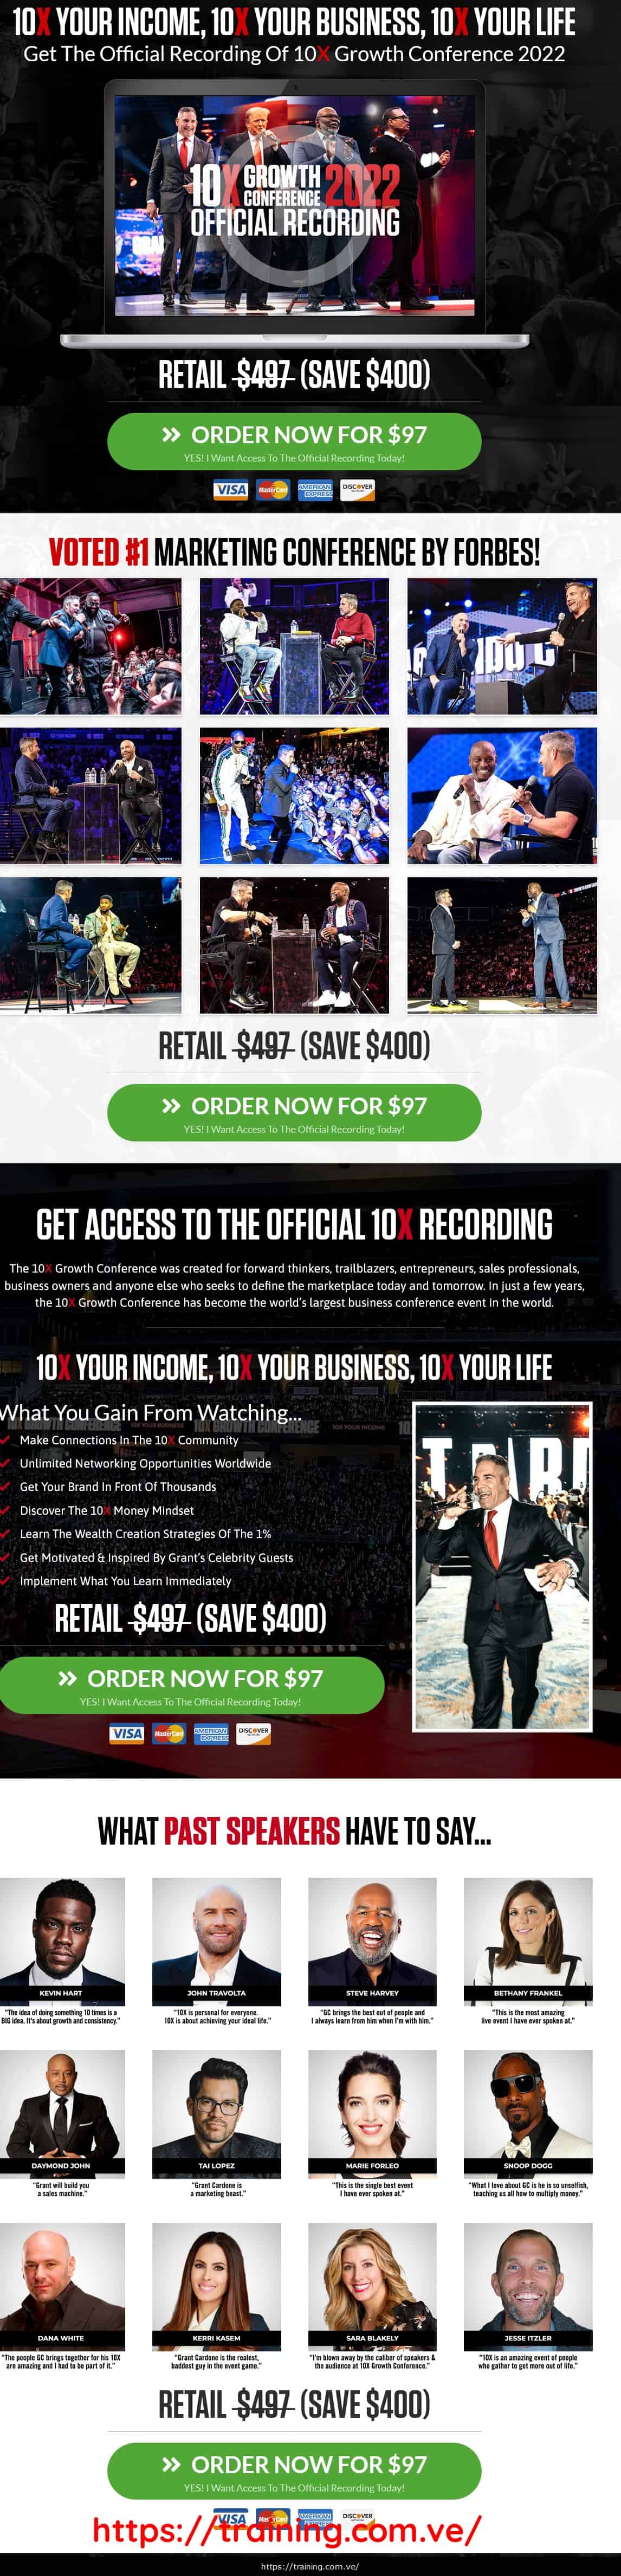 10X Growth Conference 2022 Bundle All years by Grant Cardone Sales Page